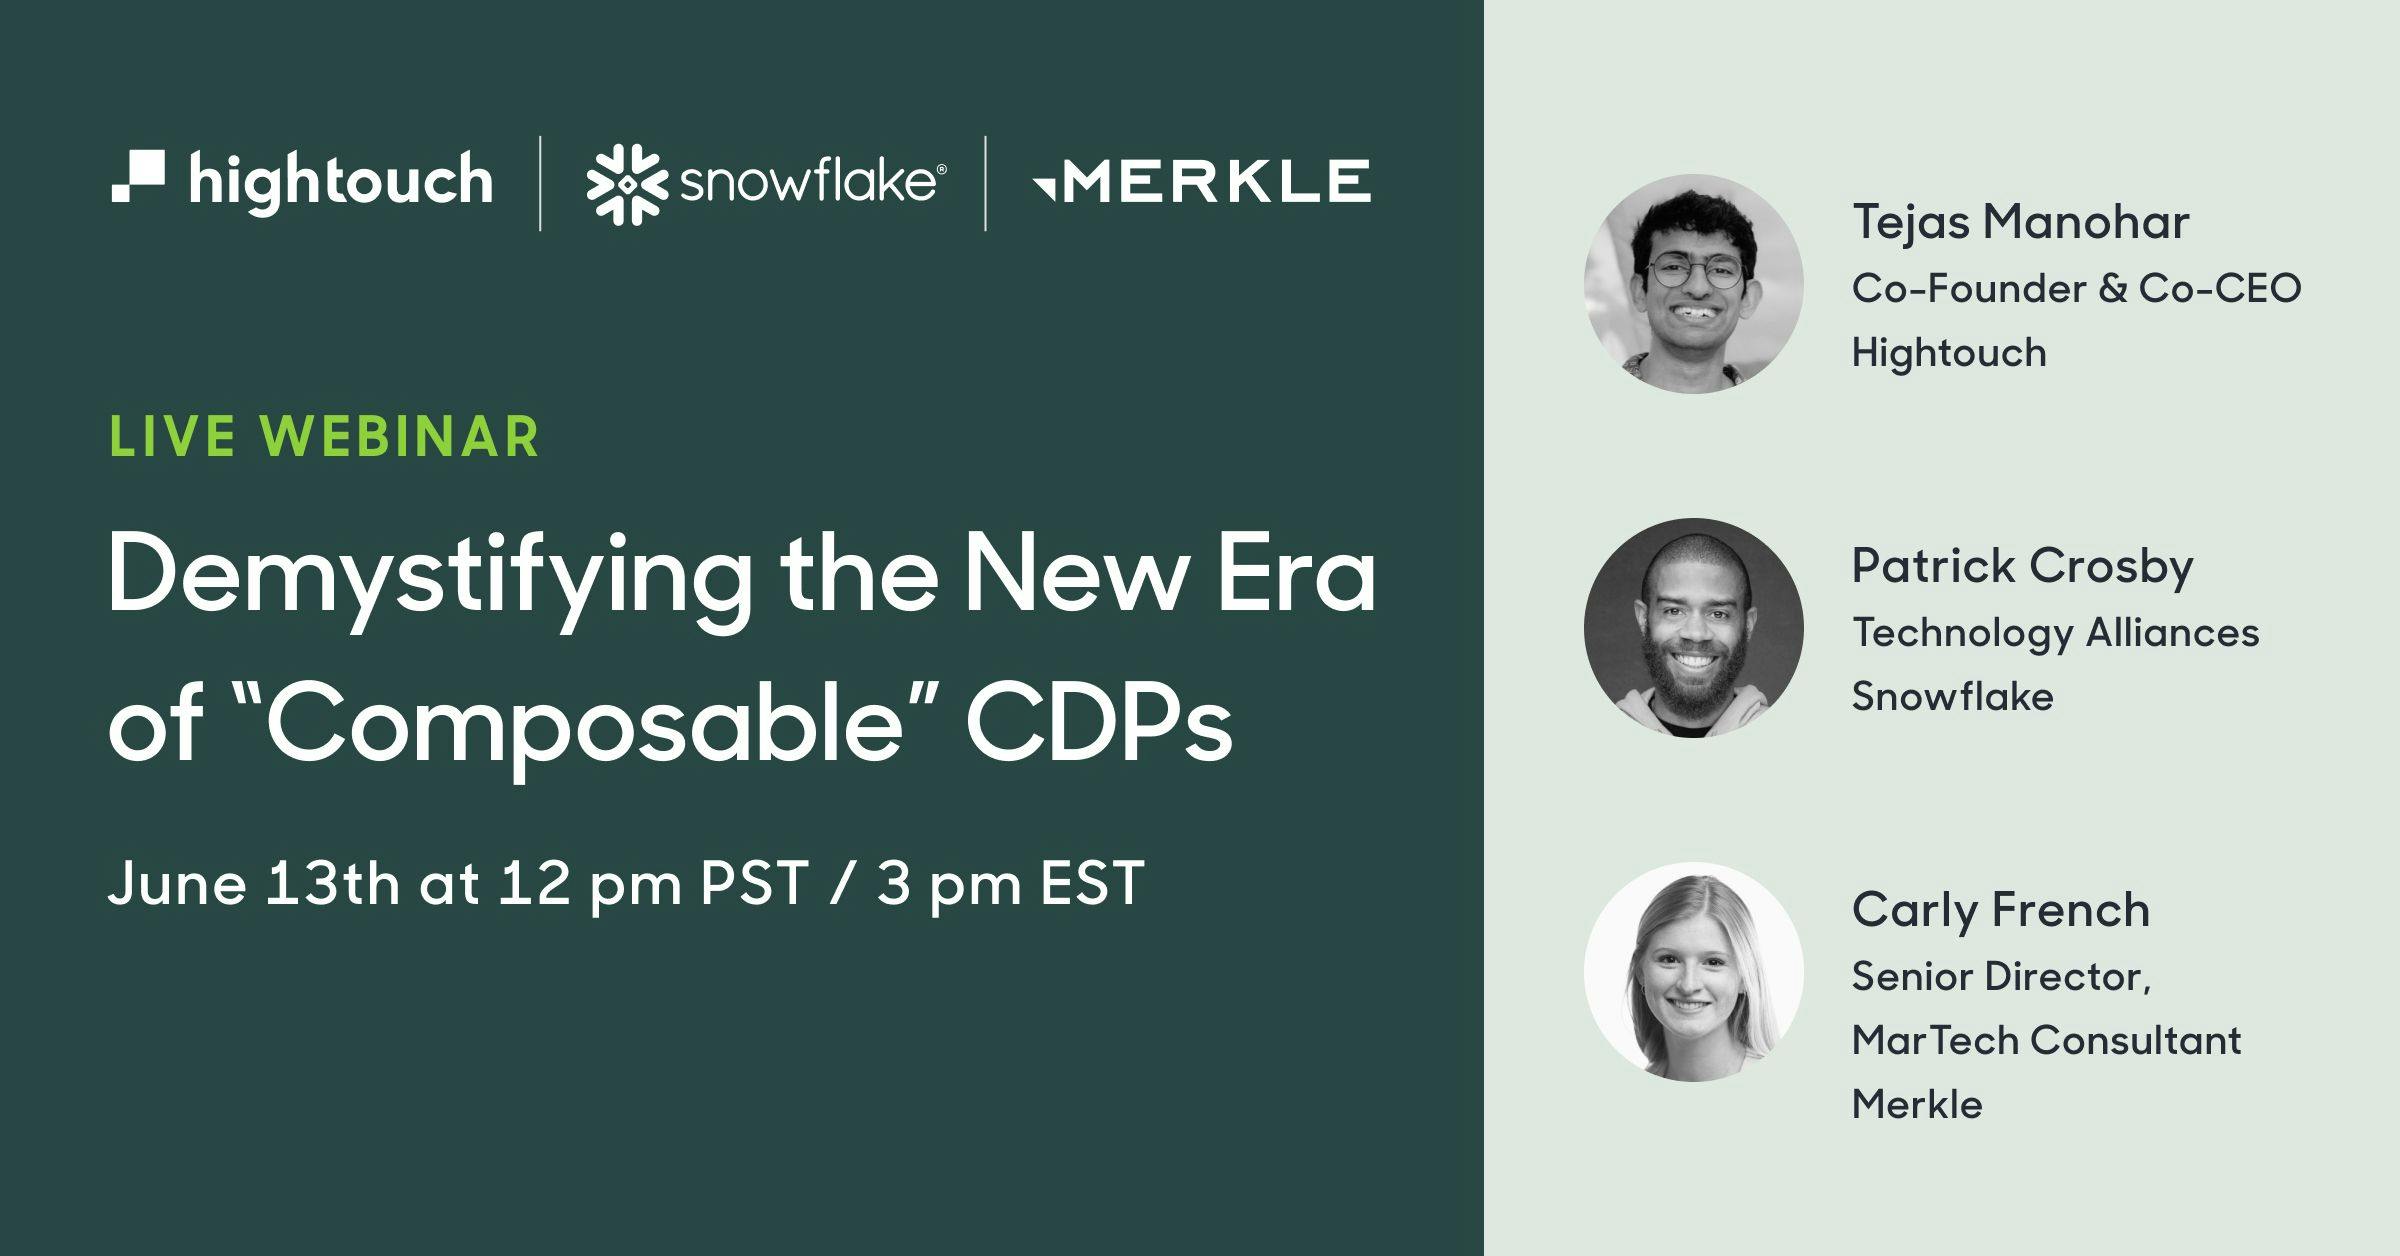 Webinar: Demystifying the New Era of “Composable” CDPs